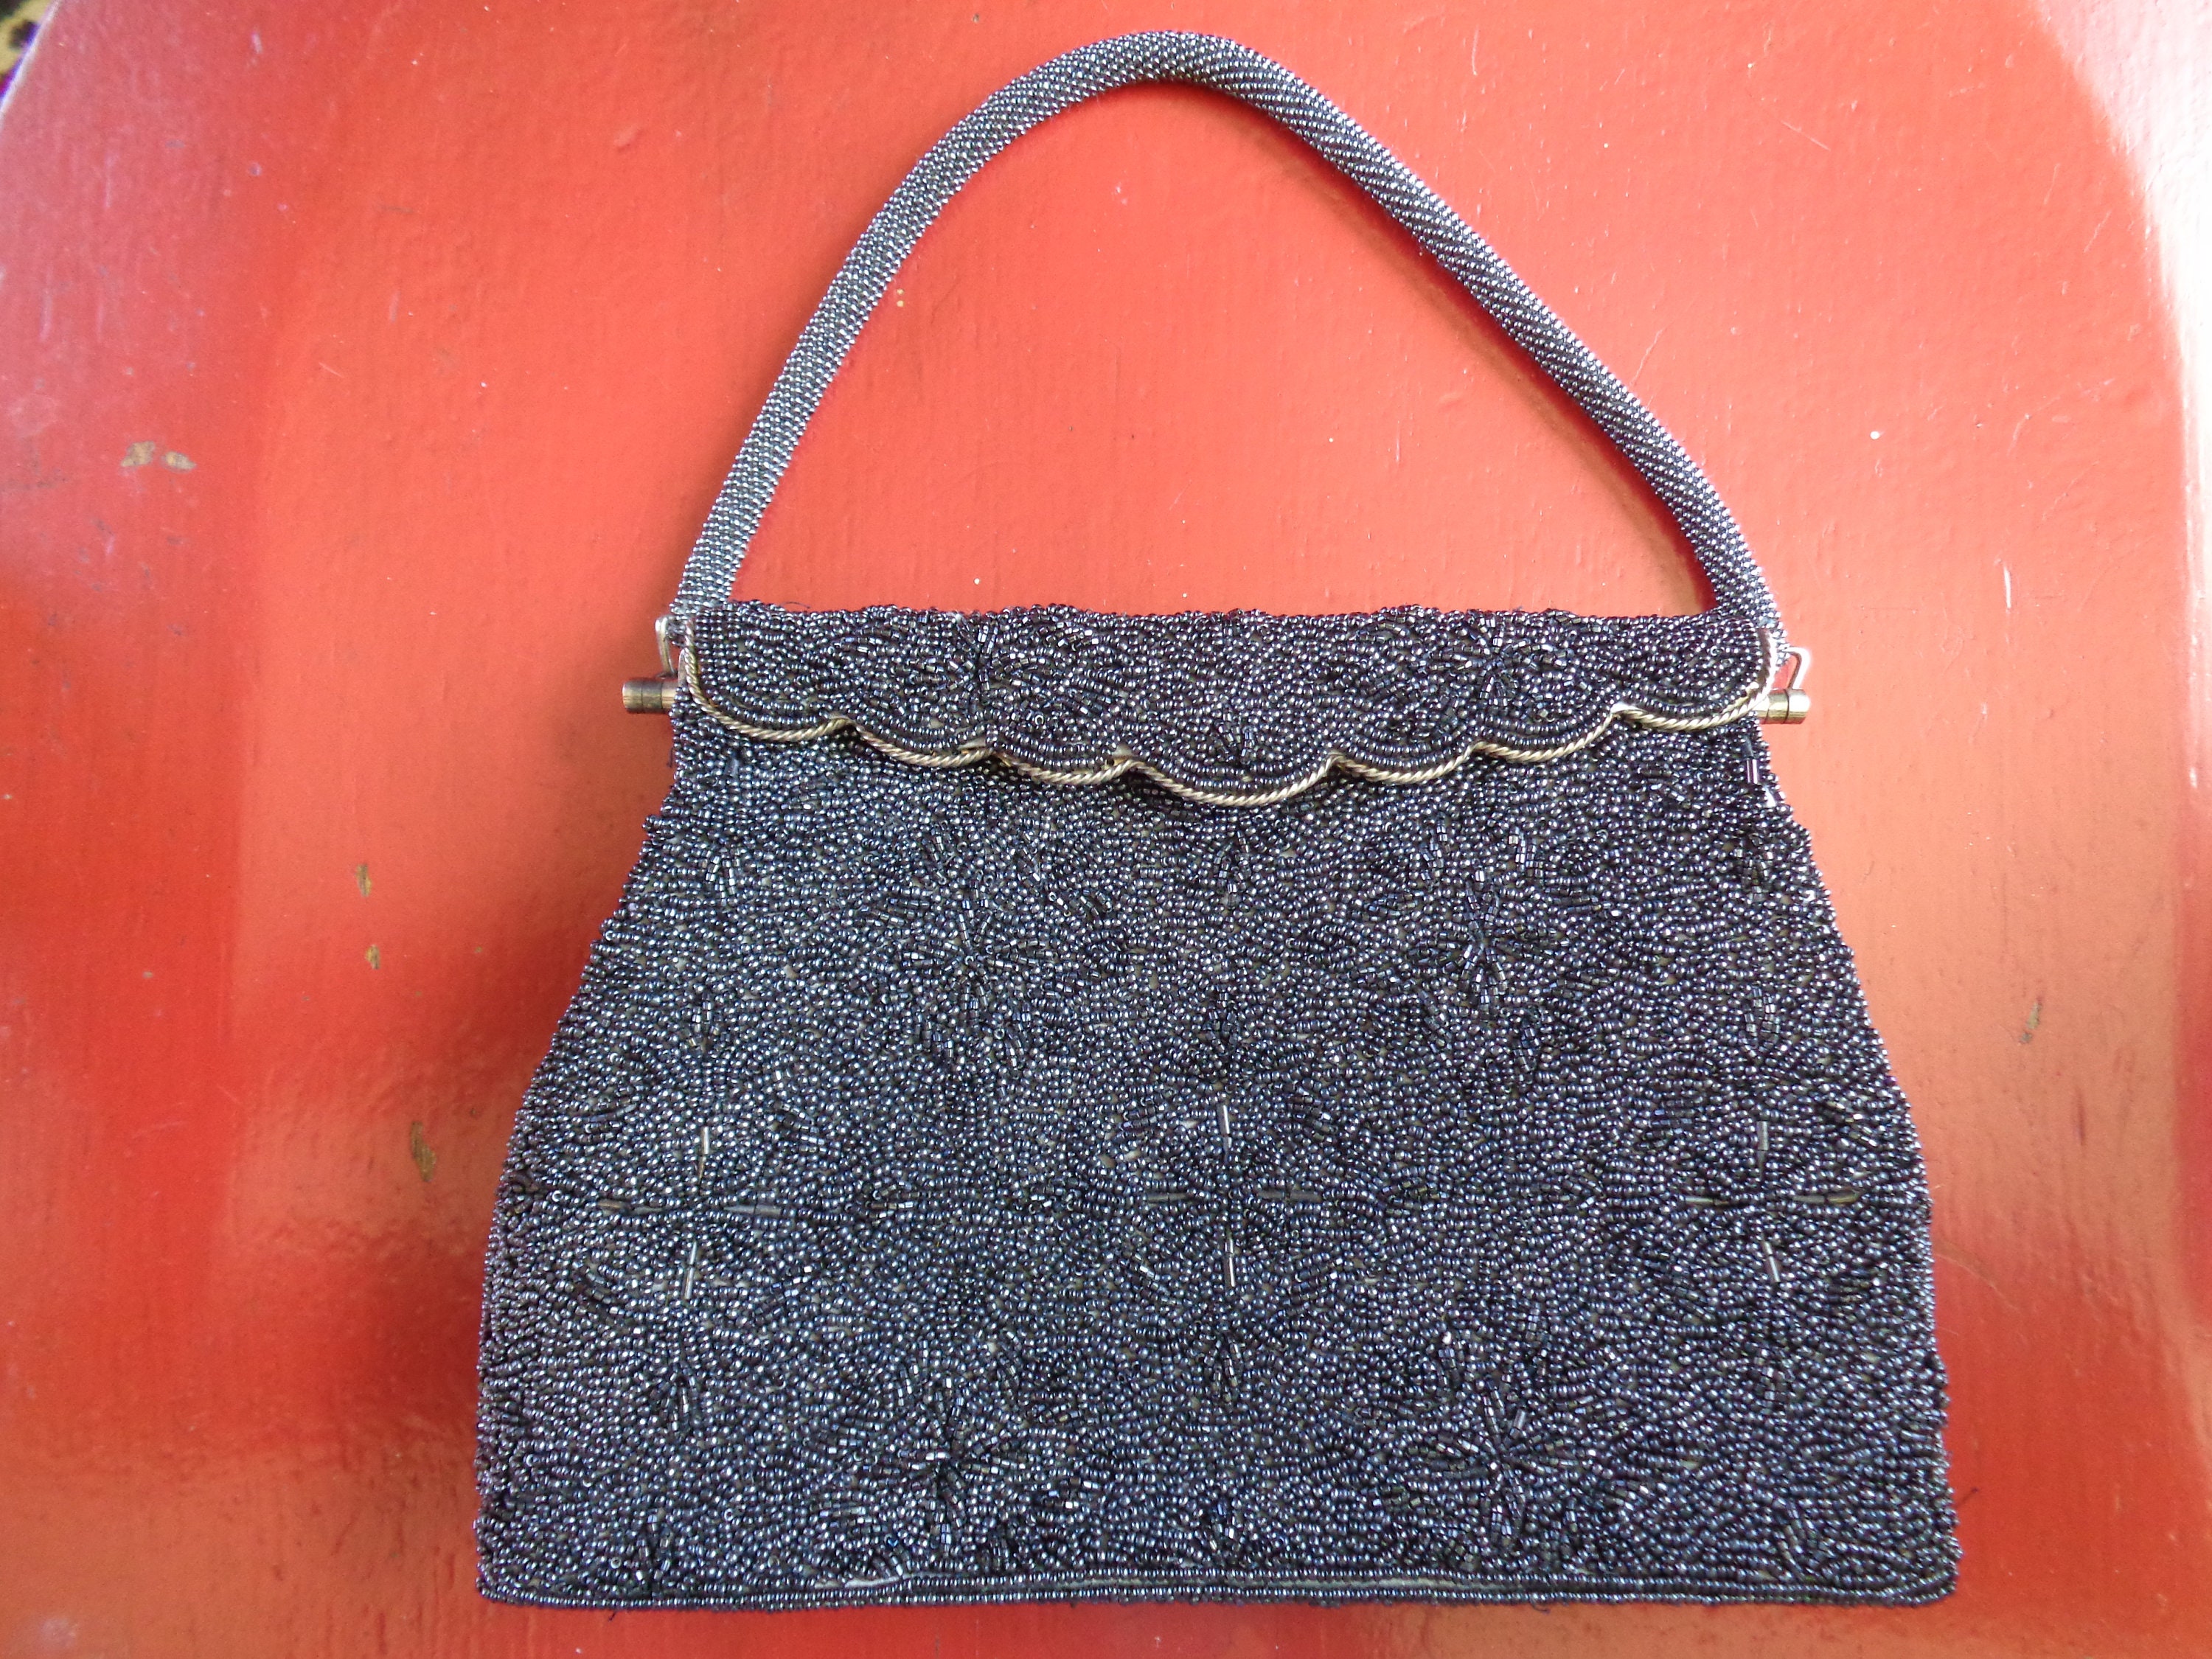 Vintage Black Beaded Purse w/Beaded Handle & Magnetic Clasp | Etsy